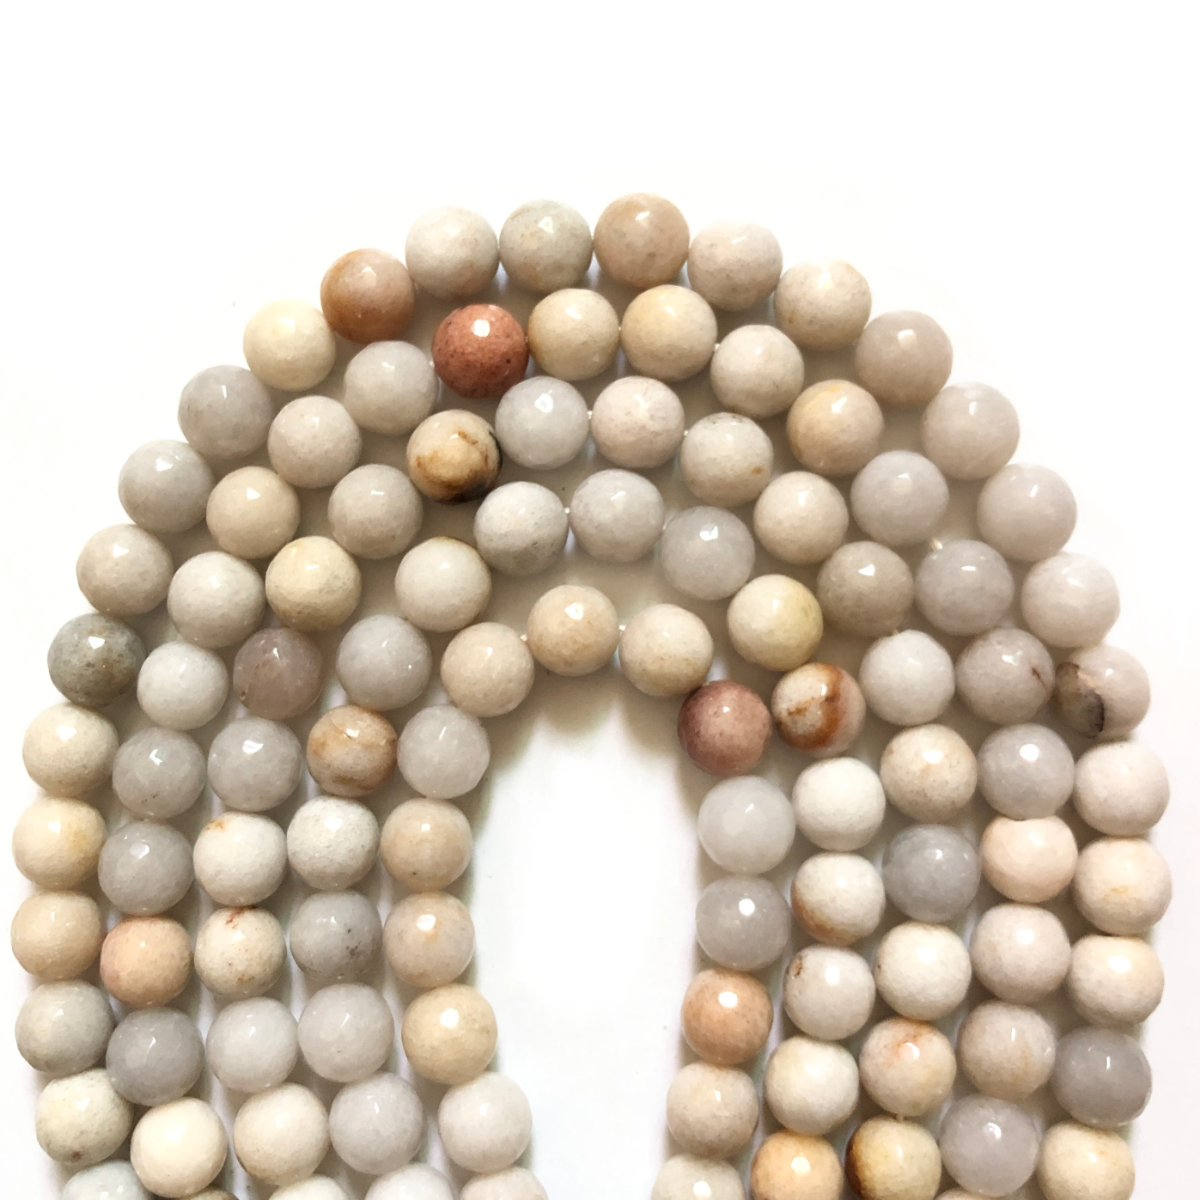 2 Strands/lot 10mm Gray Ivory Faceted Jade Stone Beads Stone Beads Faceted Jade Beads New Beads Arrivals Charms Beads Beyond